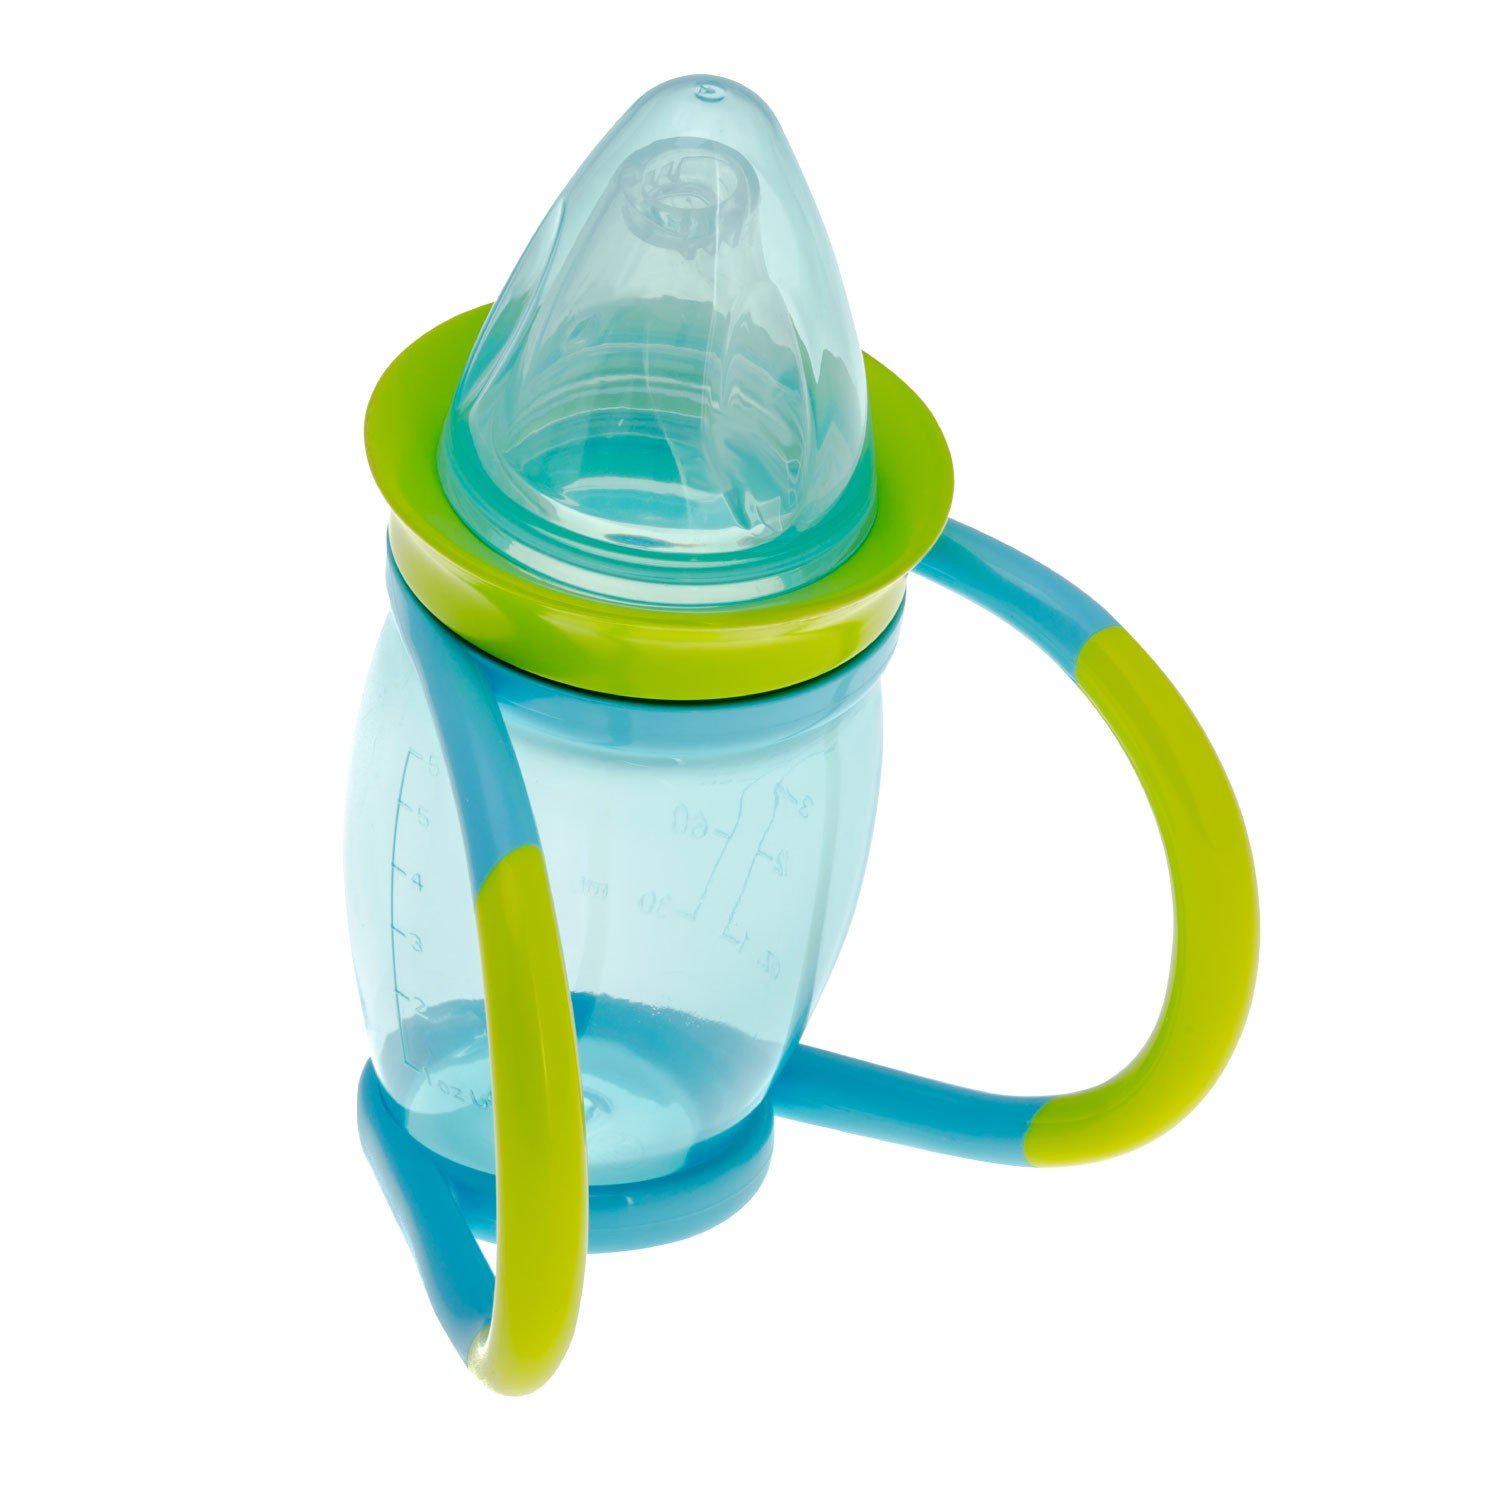 Brother max – 4 in 1 Trainer Cup (Blue/Green)